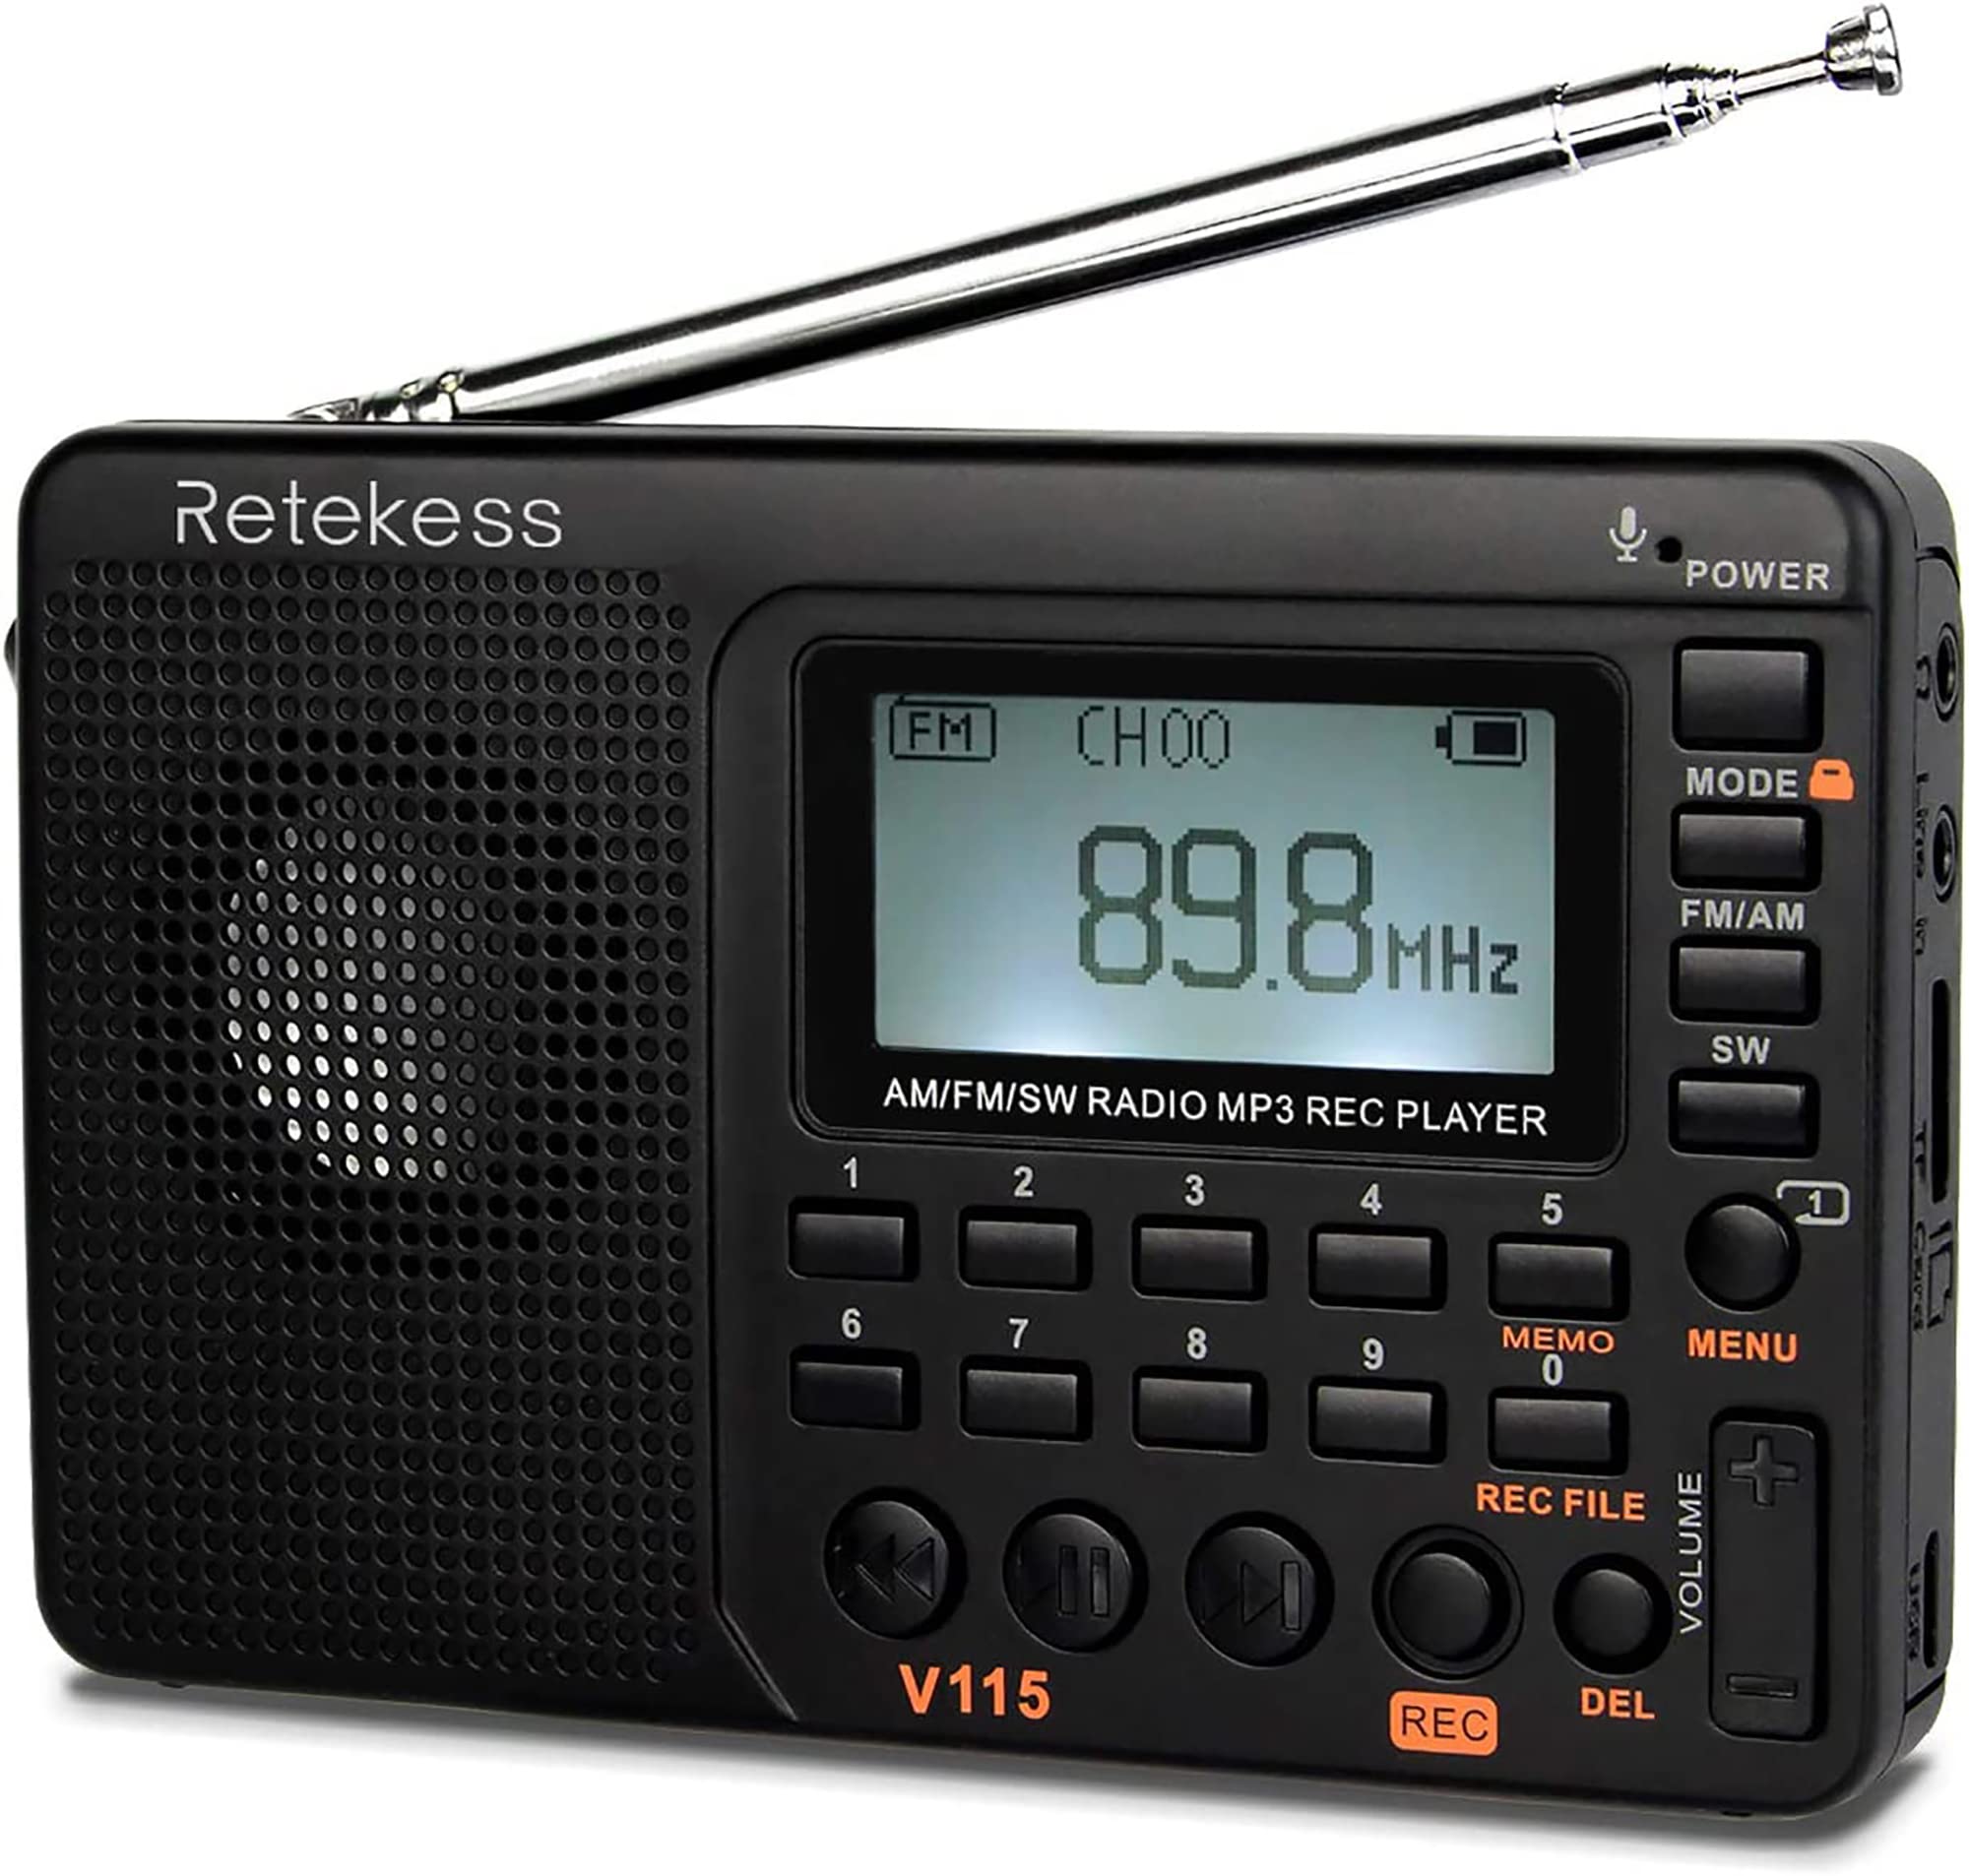 Book Cover Retekess V115 Digital Radio AM FM, Portable Shortwave Radios, Rechargeable Radio Digital Tuner and Presets, Support Micro SD and AUX Record, Bass Speaker.